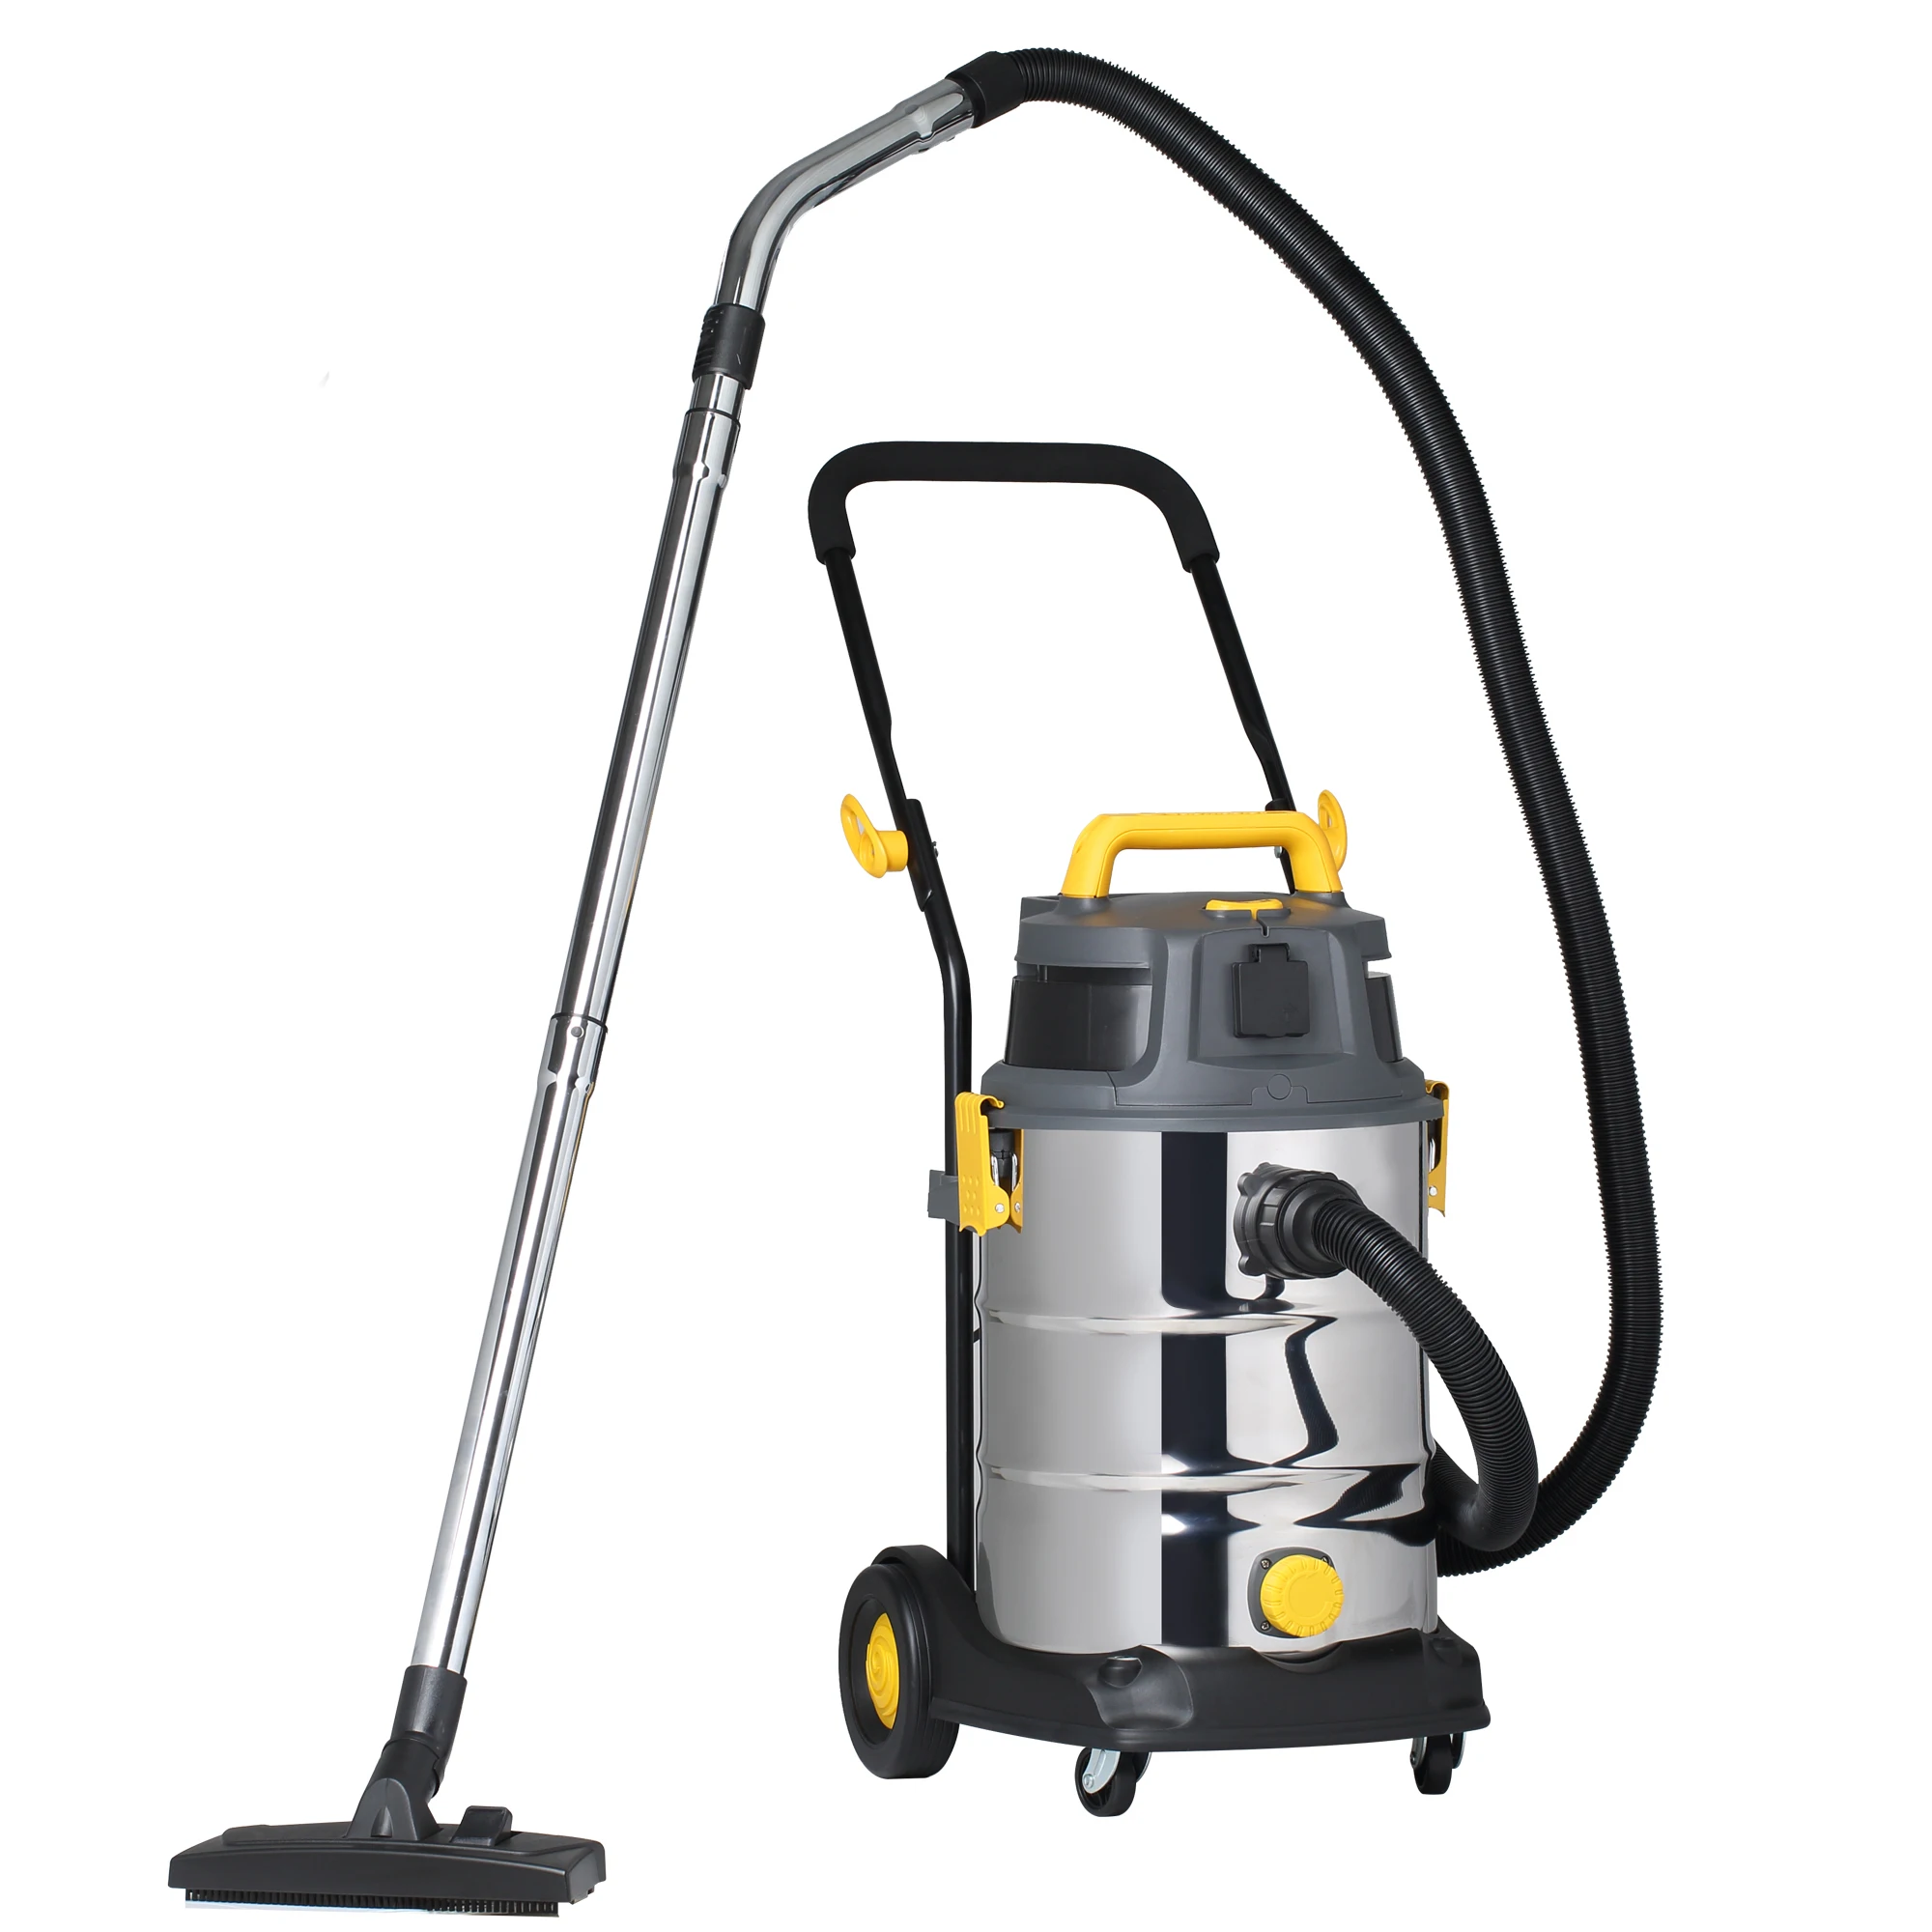 Vacmaster L Class Dust Extractor 240V Industrial Wet and Dry Vacuum Cleaner with HEPA 13 Filtration for Commercial & Professional Use 30L